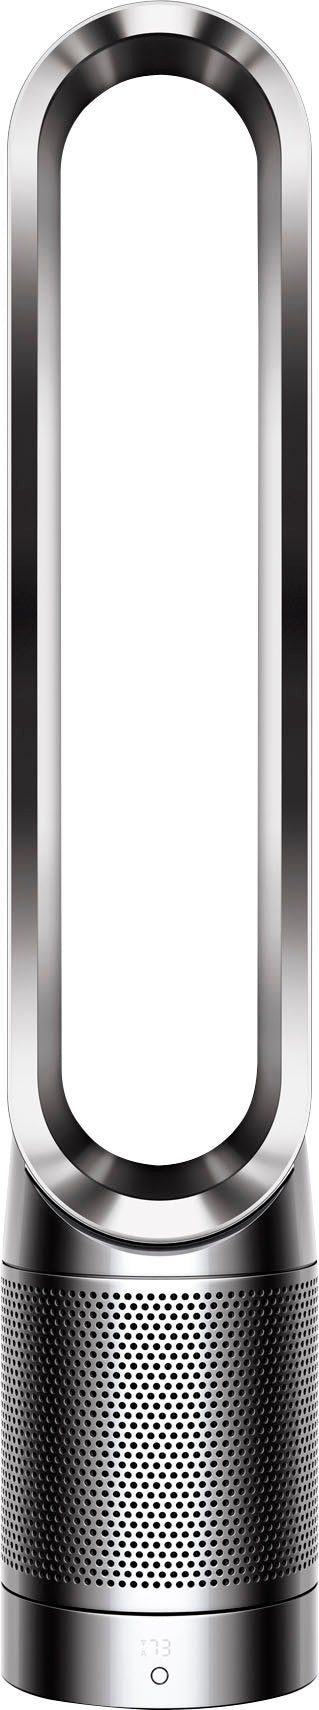 Dyson Pure Cool Link TP02 Smart Tower Air Purifier NO REMOTE 308401-01 - Nickel Like New